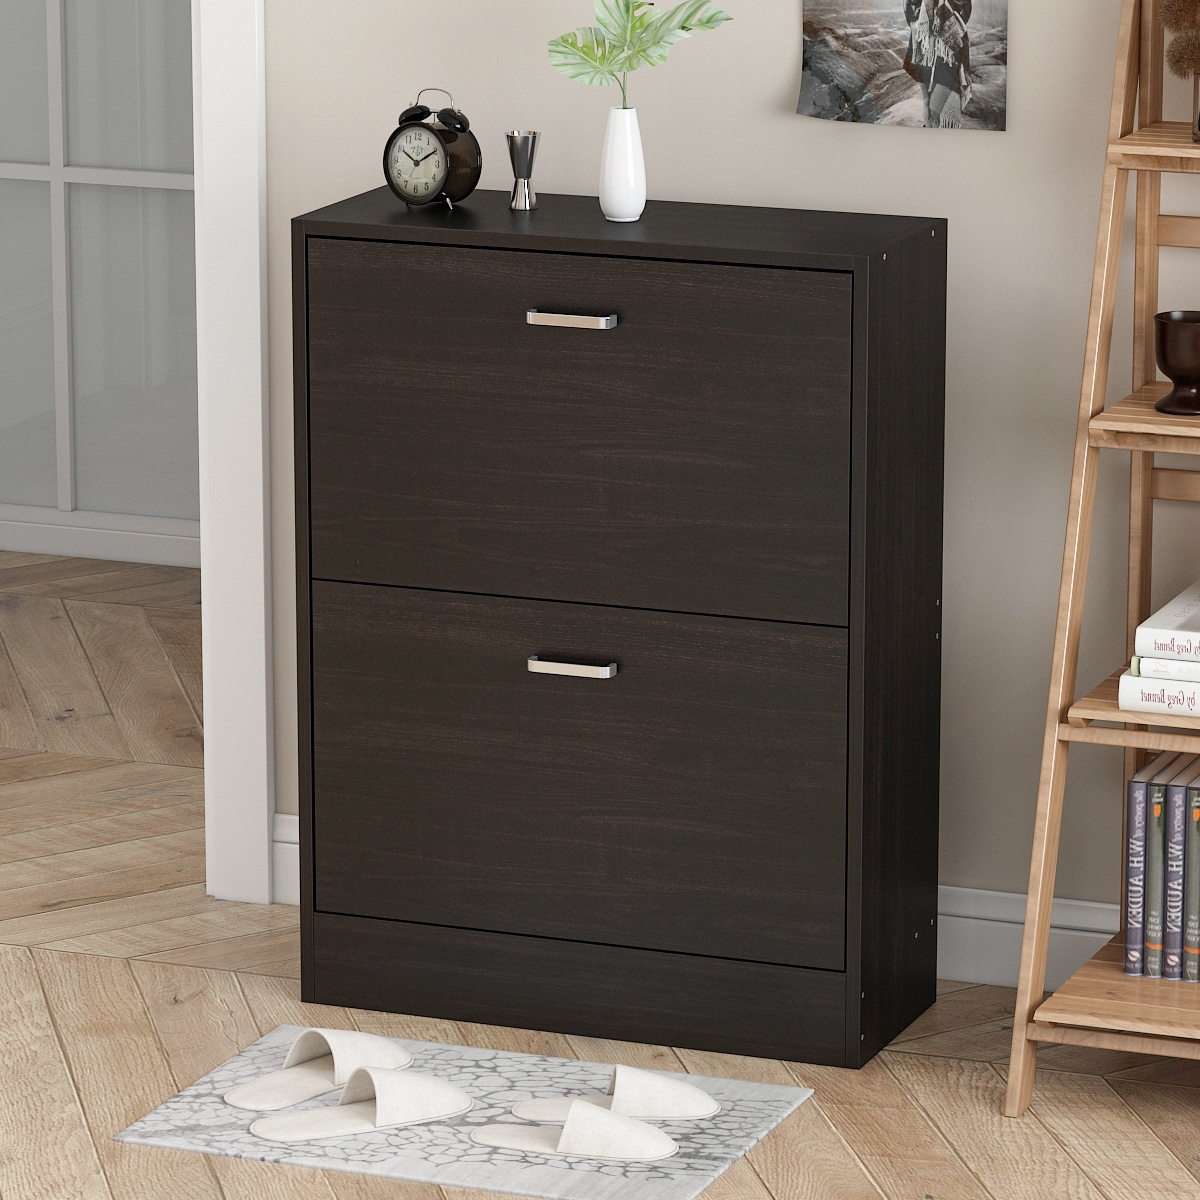 https://ak1.ostkcdn.com/images/products/is/images/direct/05f9159d978a24224653d837e37d8821e3e63d92/Kerrogee-2-Drawes-Shoe-Cabinet---4-Tiers-Shoe-Rack---Up-to-12-Pairs.jpg